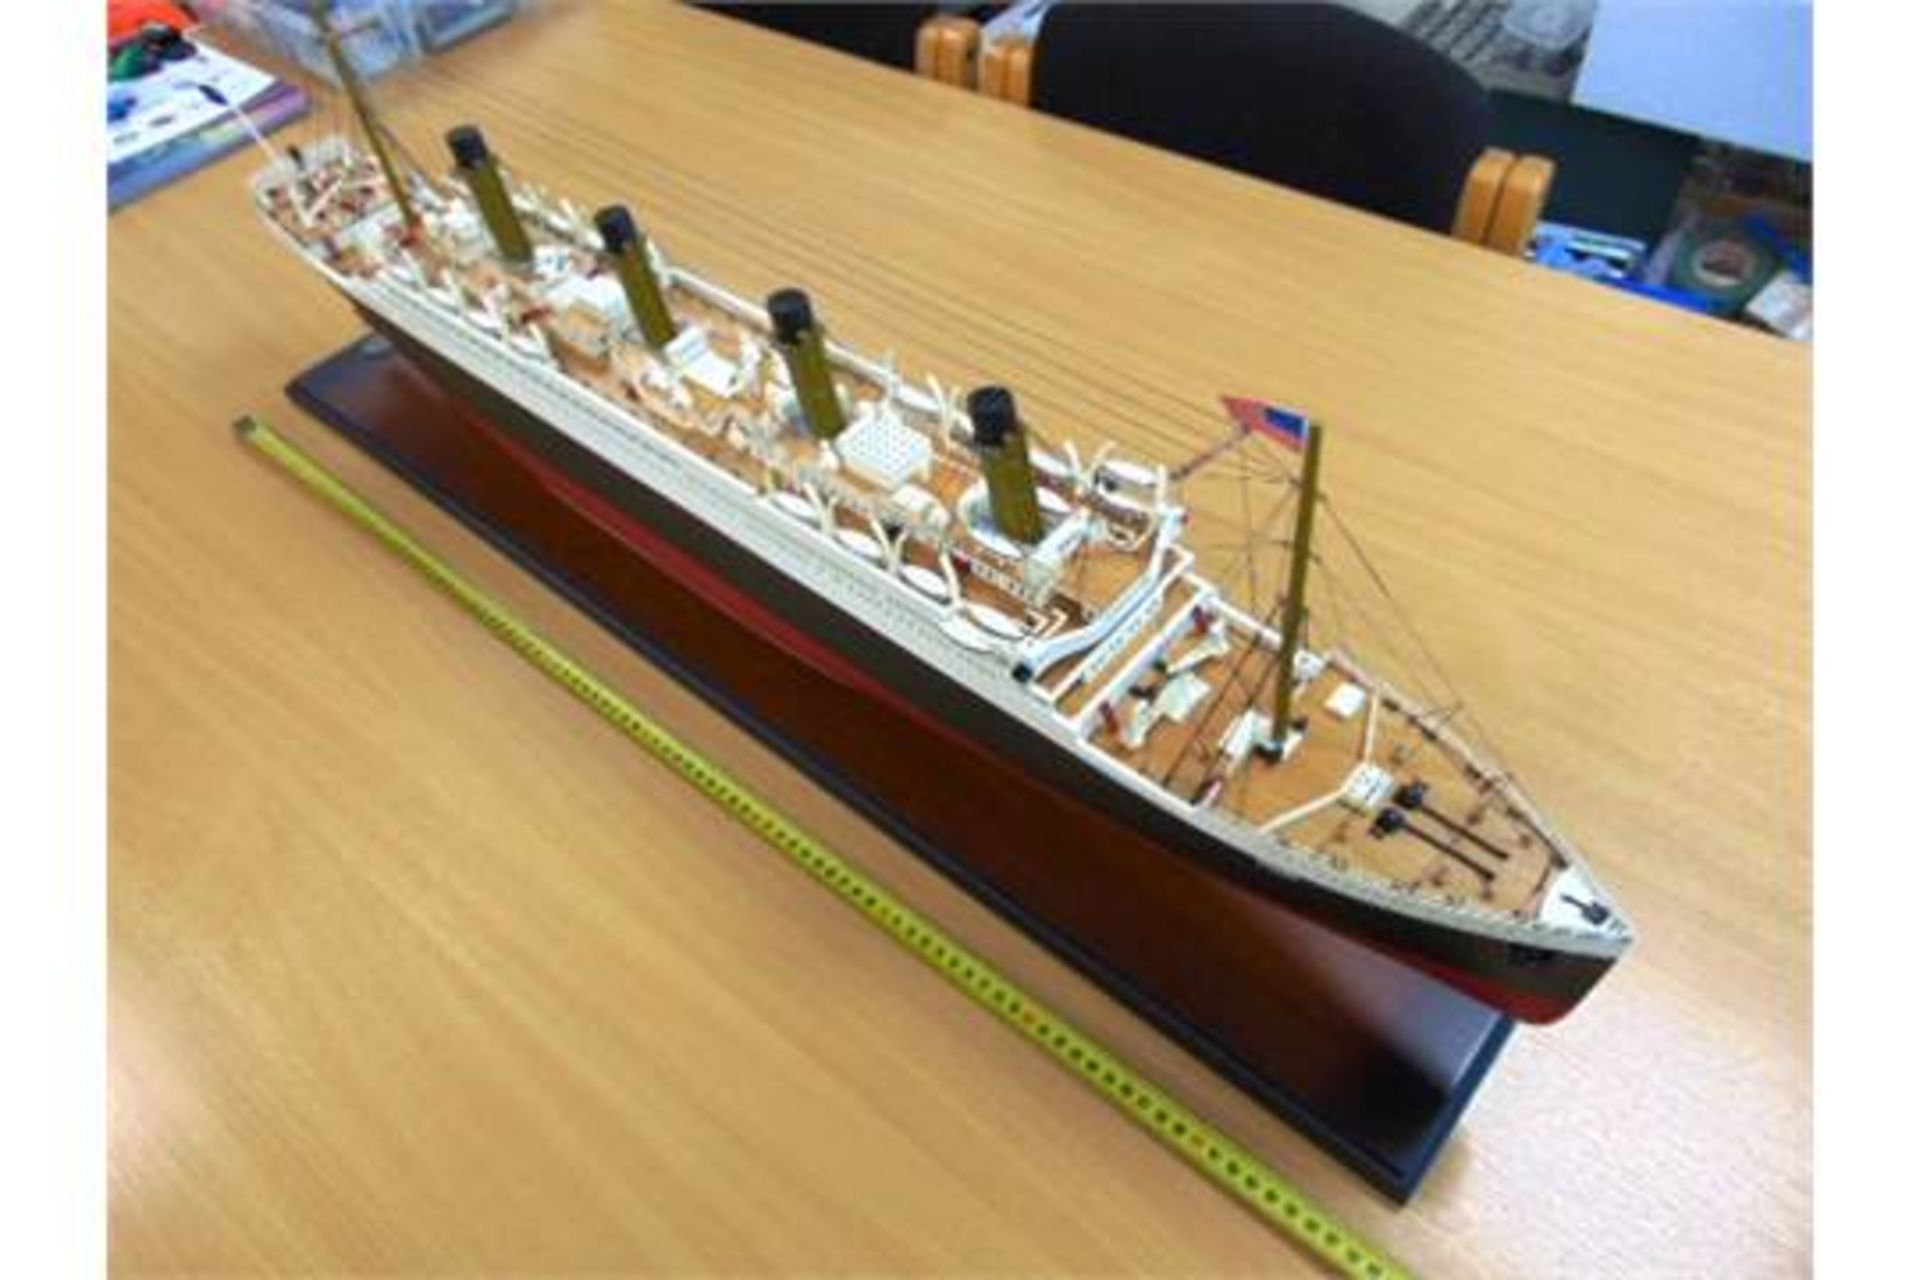 RMS Titanic Highly Detailed Wood Scale Model - Image 3 of 11